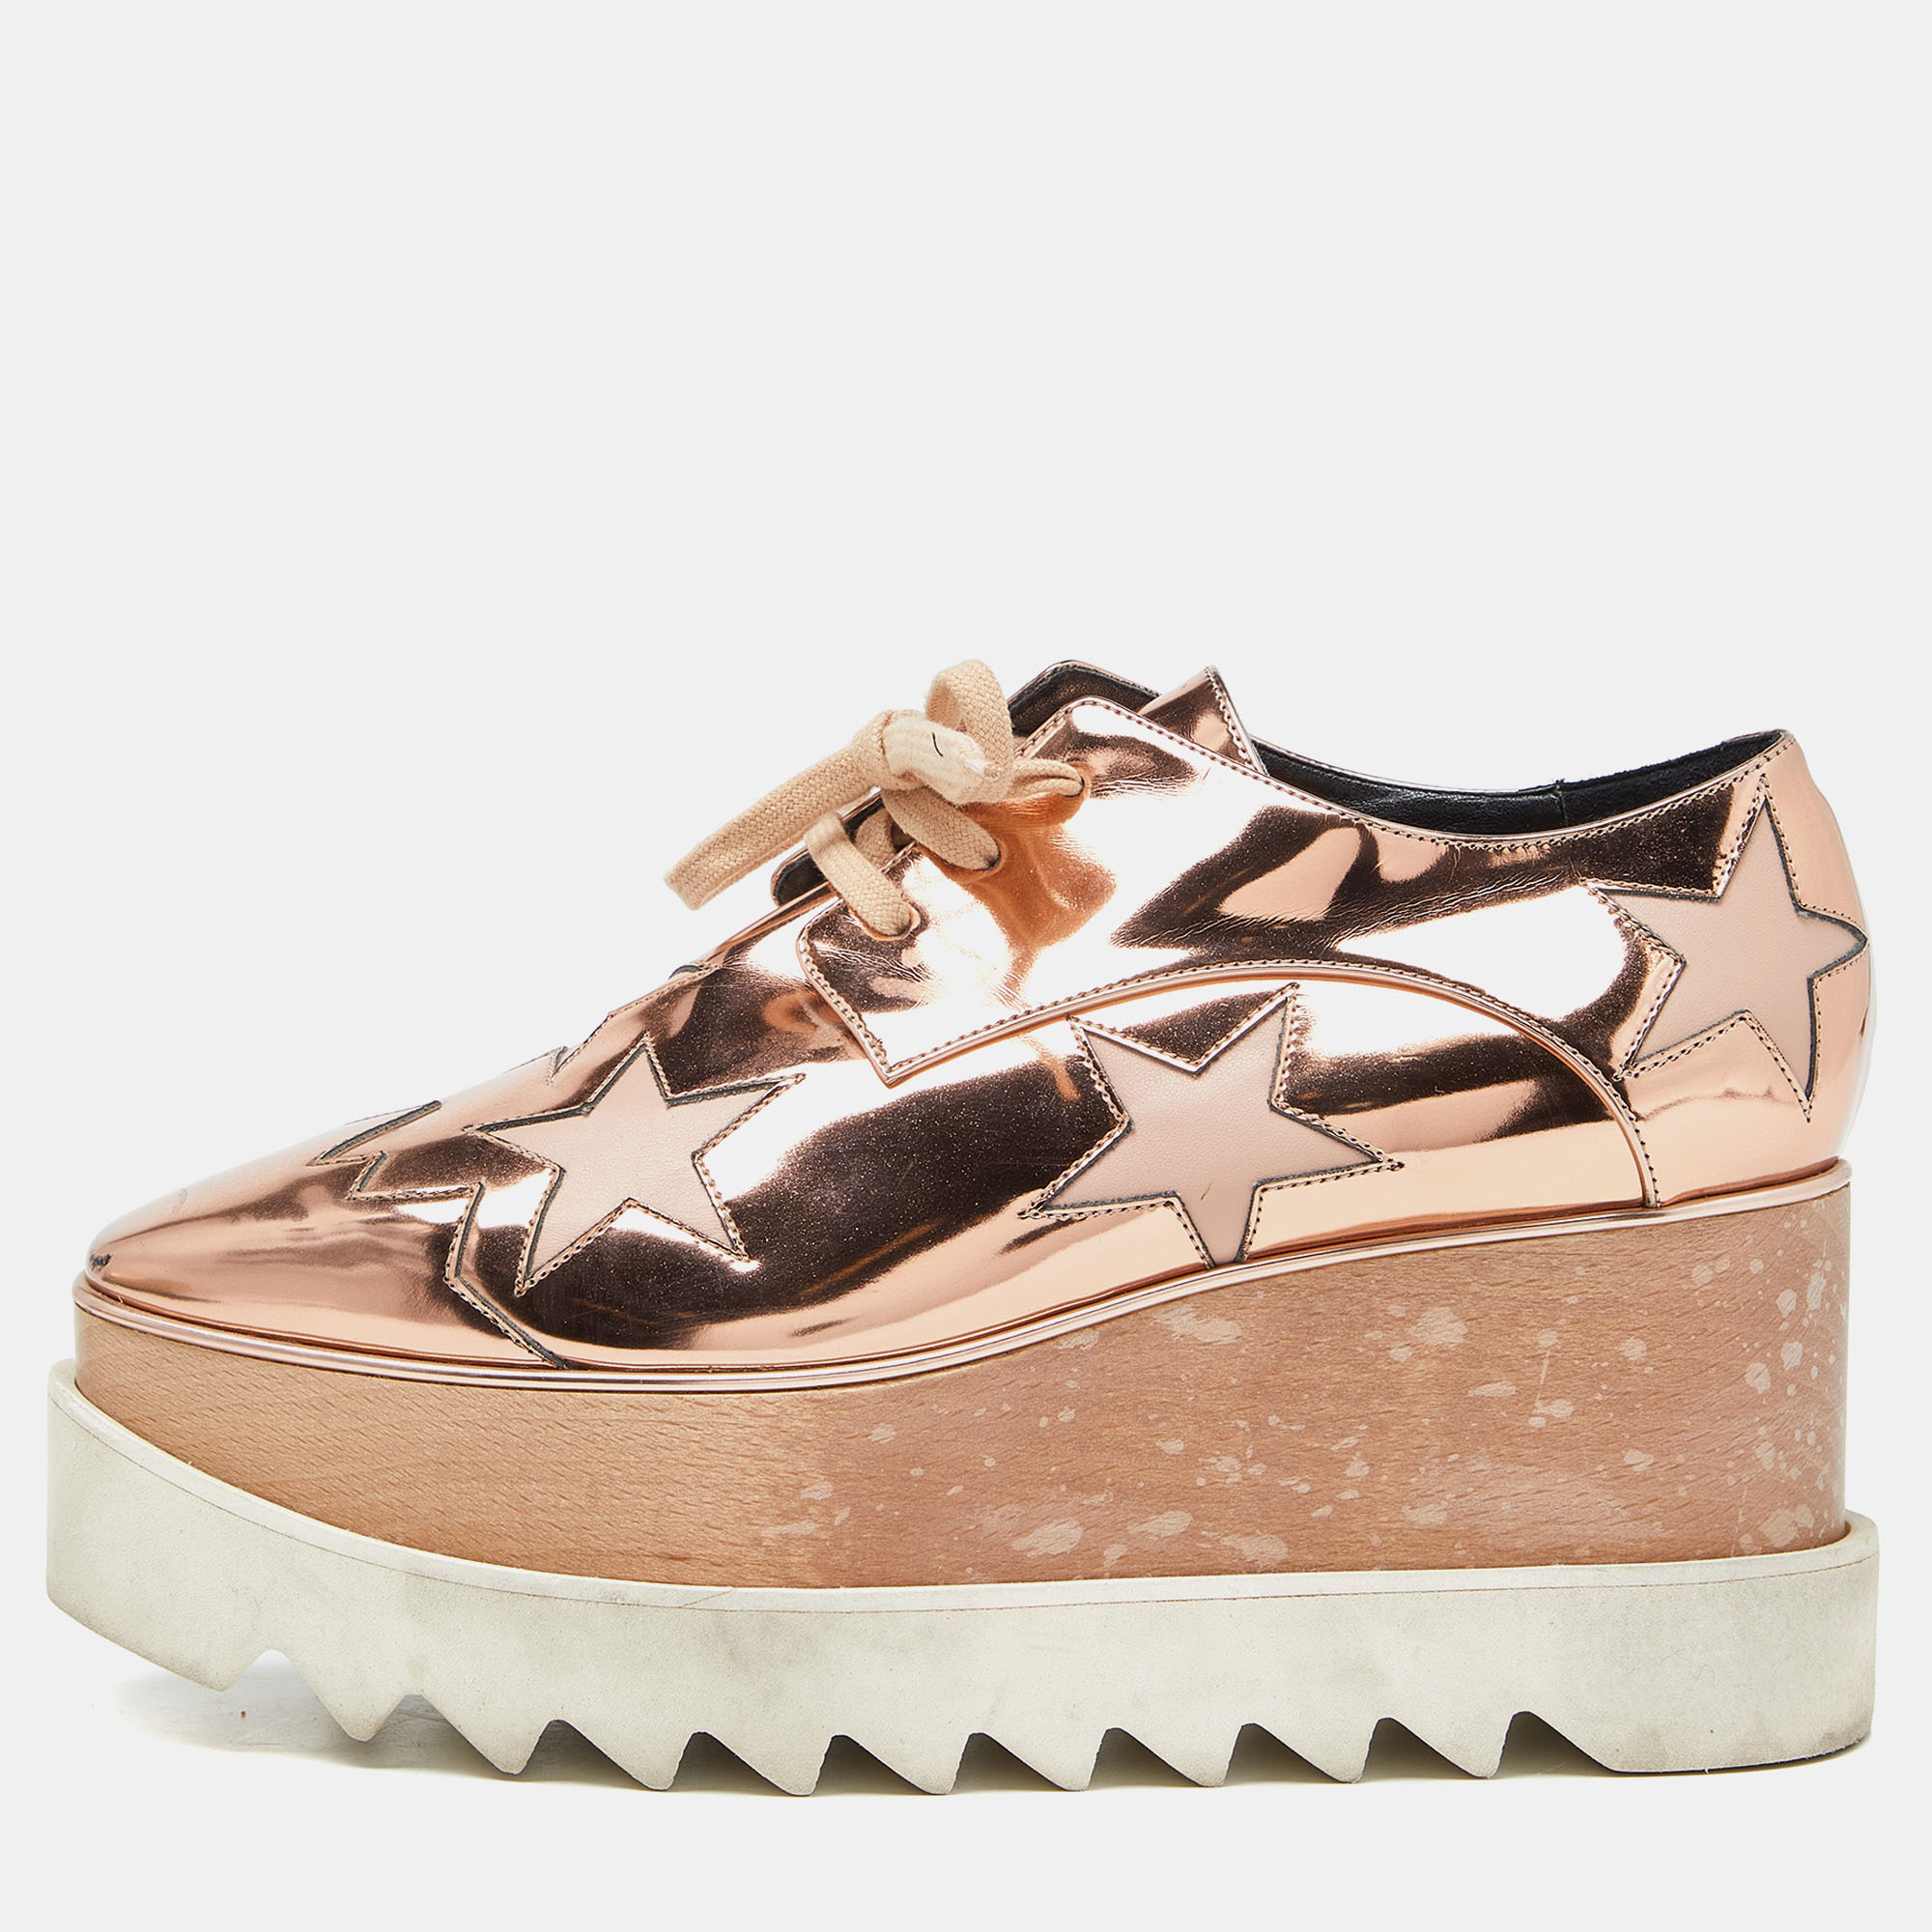 Pre-owned Stella Mccartney Metallic Rose Gold Faux Leather Elyse Platform Derby Trainers Size 37